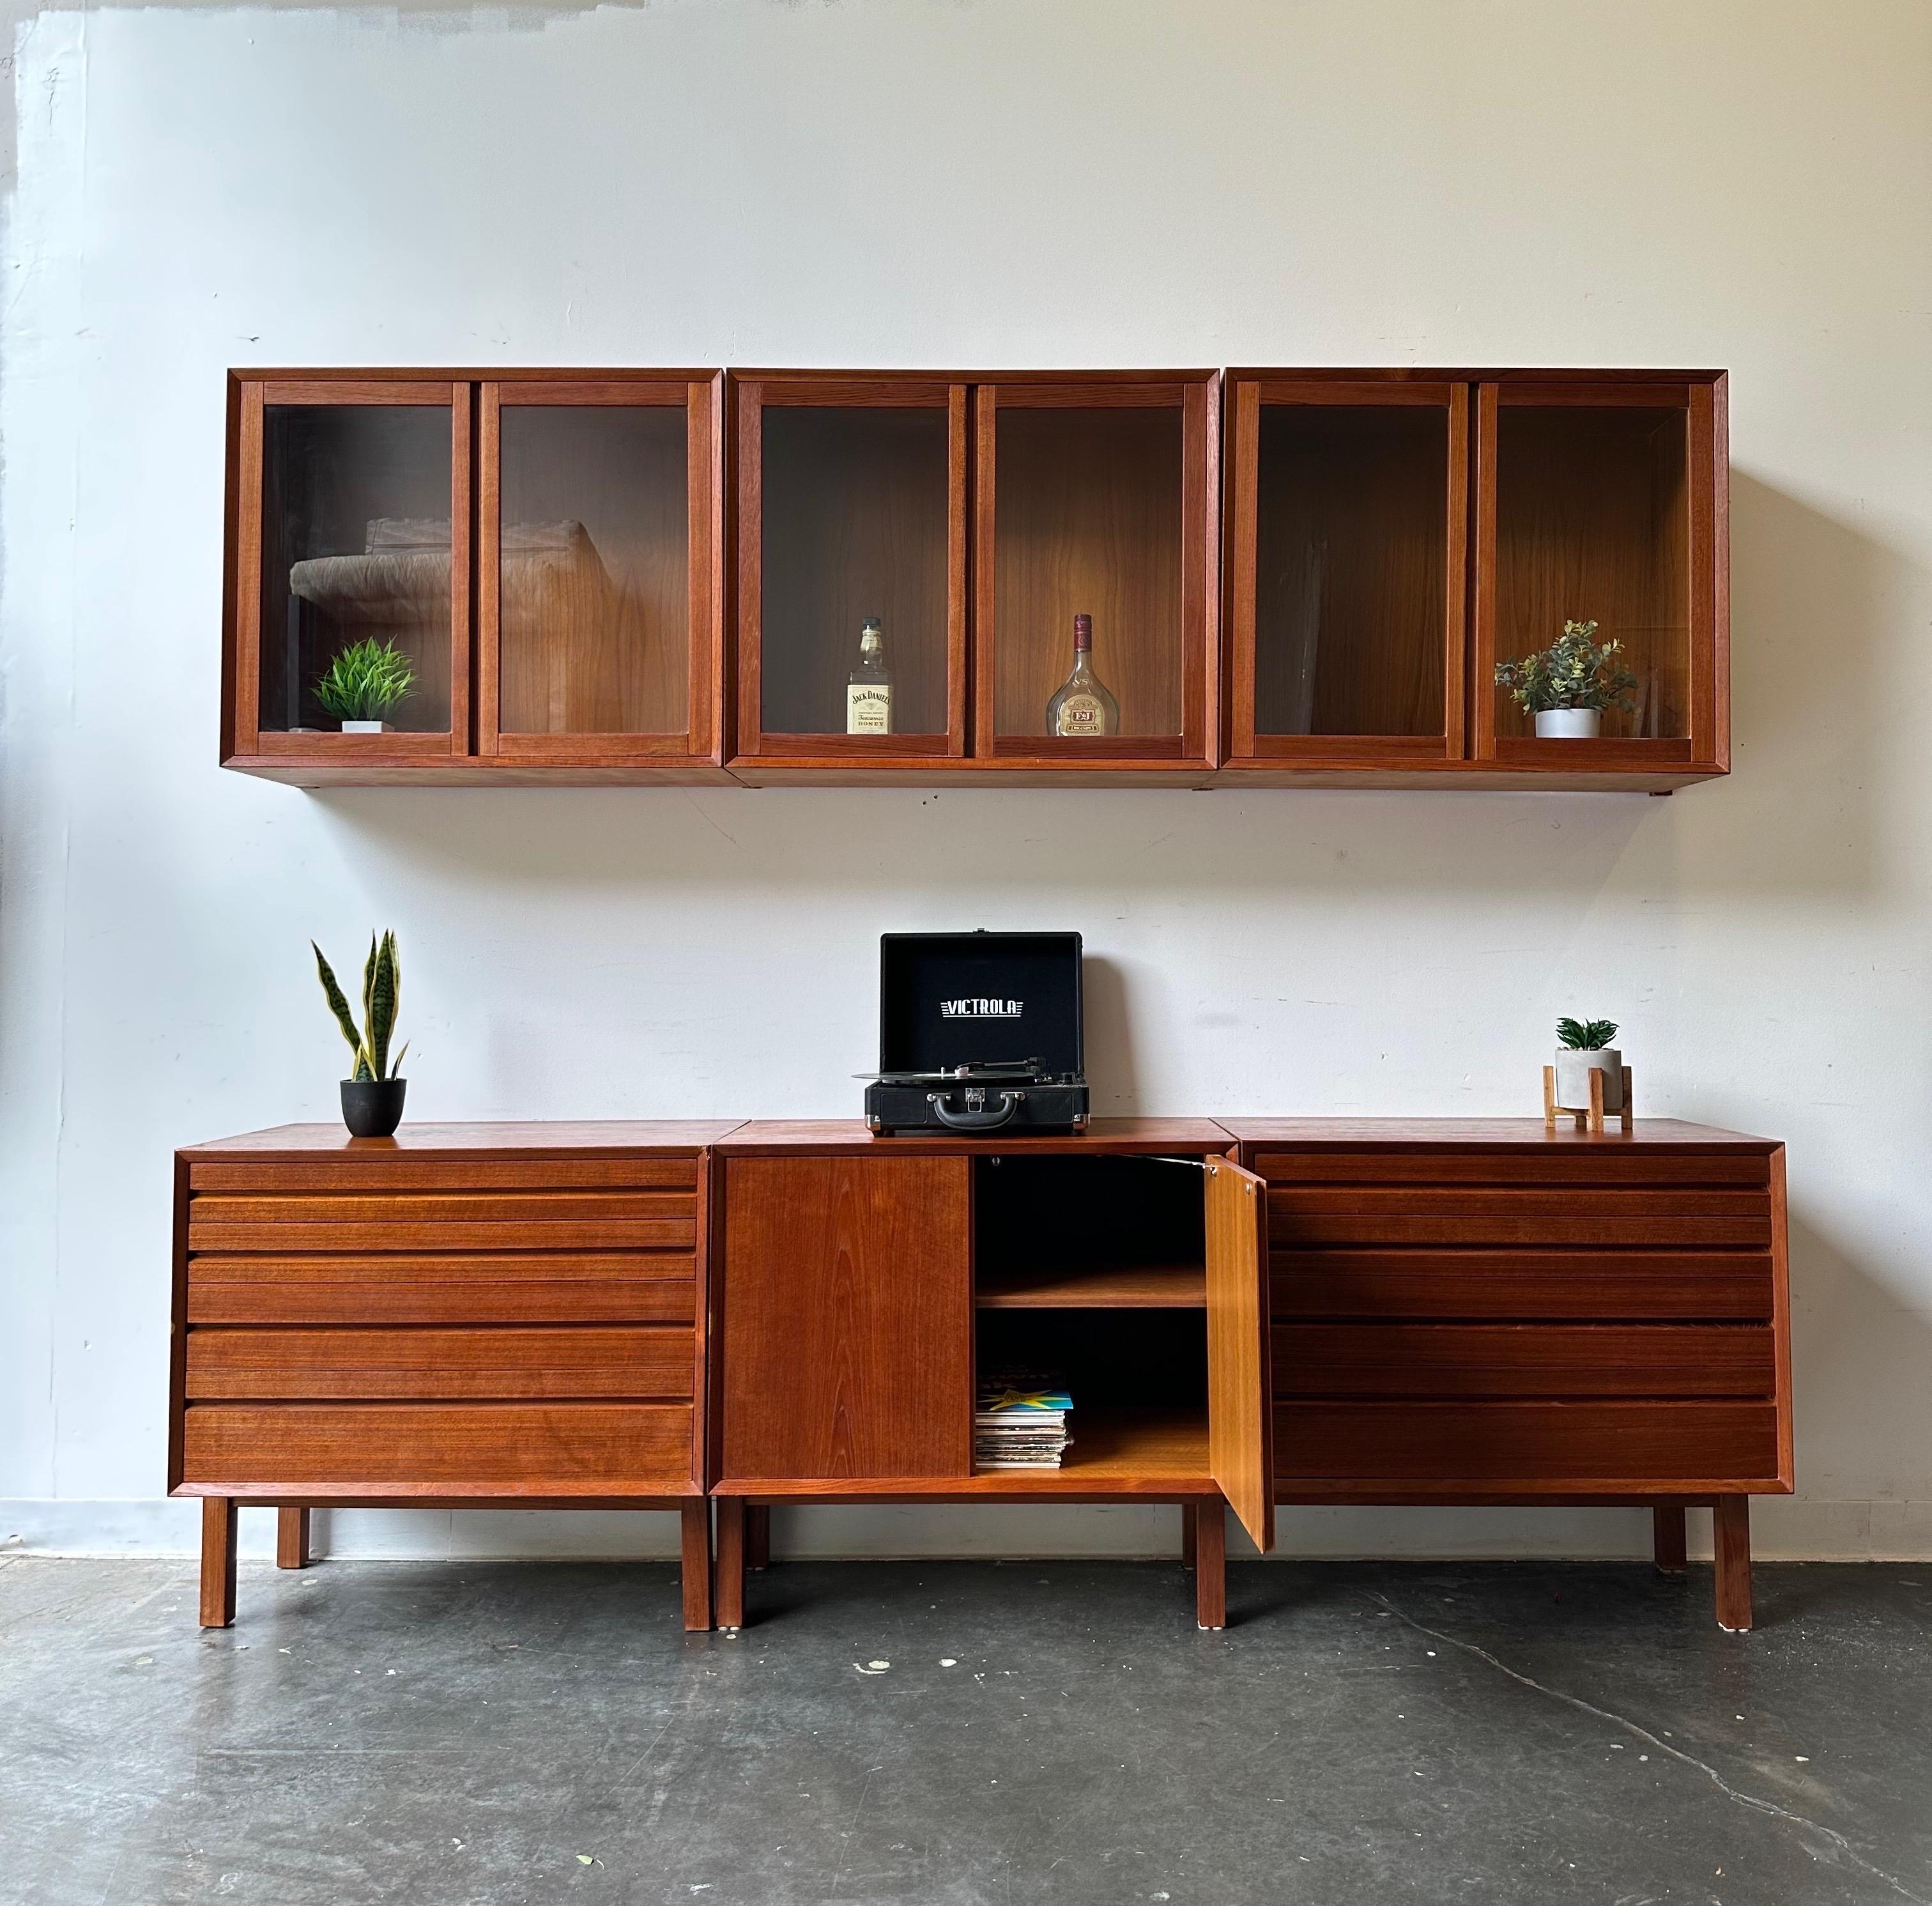 Wall Unit by Poul Cadovius for Cado

Gorgeous teak Modular wall unit.
Includes three floating glass door shelves with brackets and three bottom cabinets ( one open hutch with shelf and two drawer units ) sitting on a cado floor stand.

This unit is